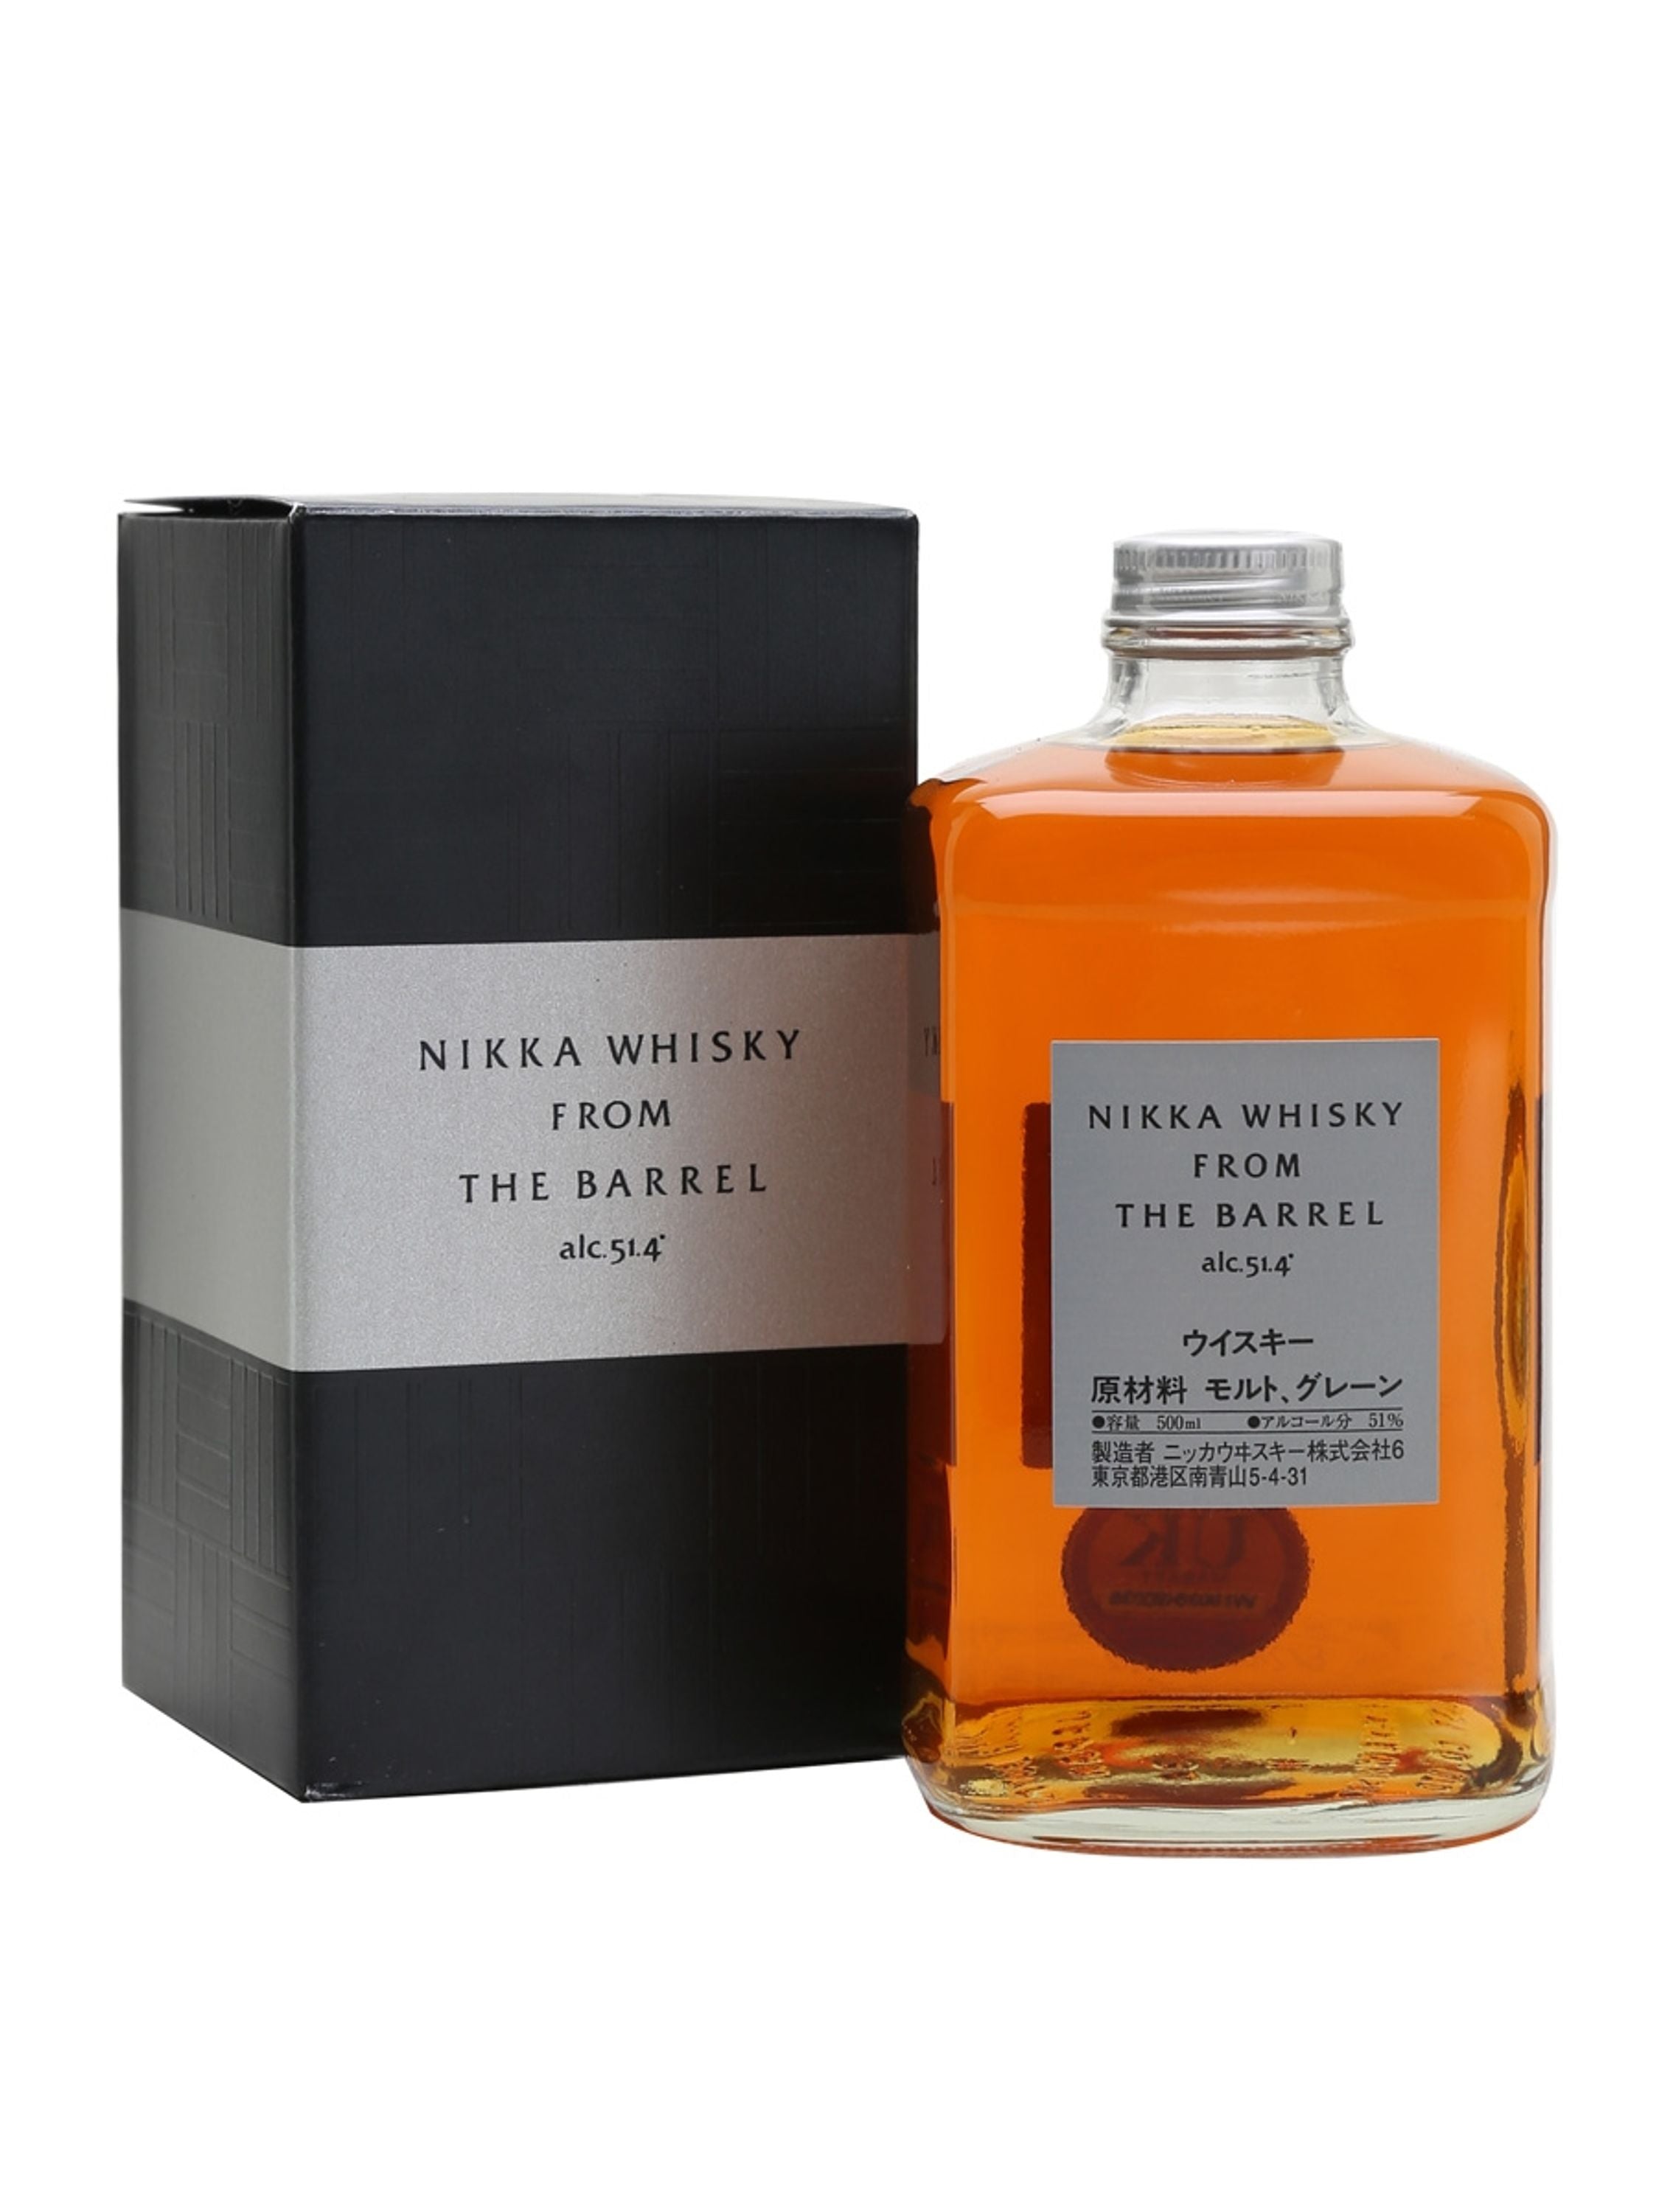 Nikka From the Barrel Blended Whisky 0.5l, alc. 51.4% vol.